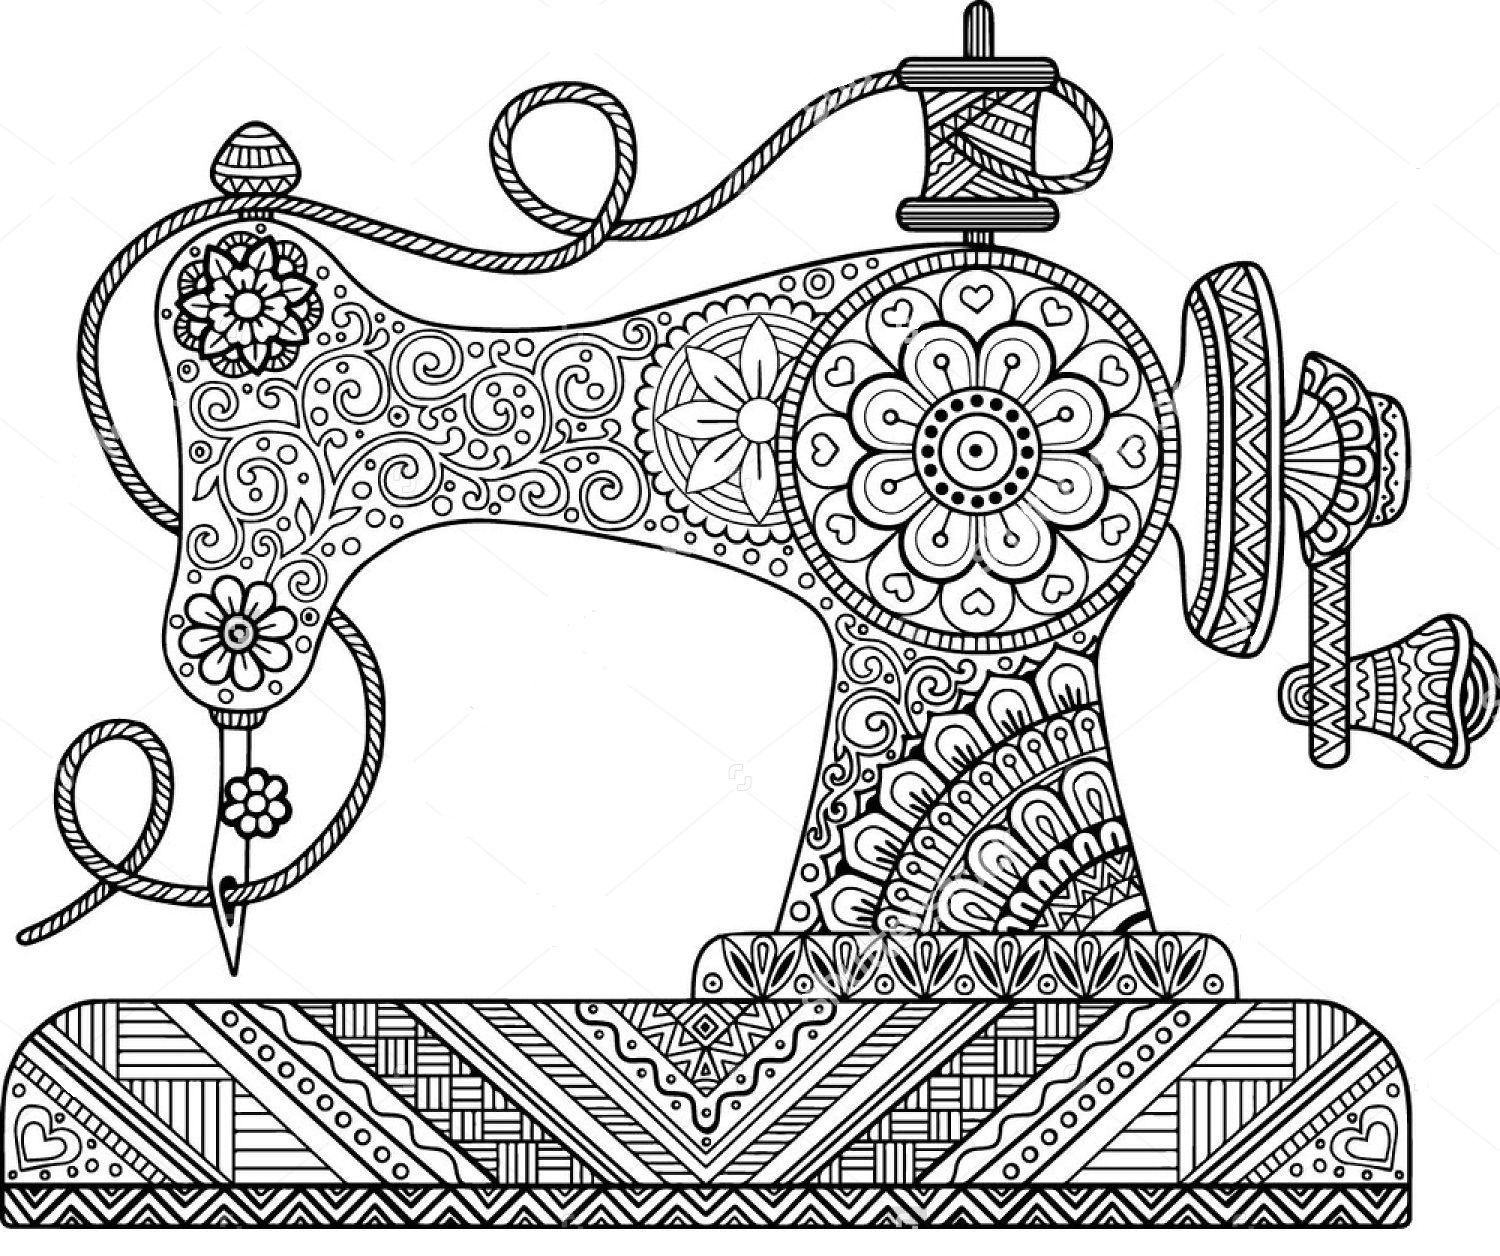 Sewing Machine Zentangle | Sewing machine drawing, Coloring pages ...